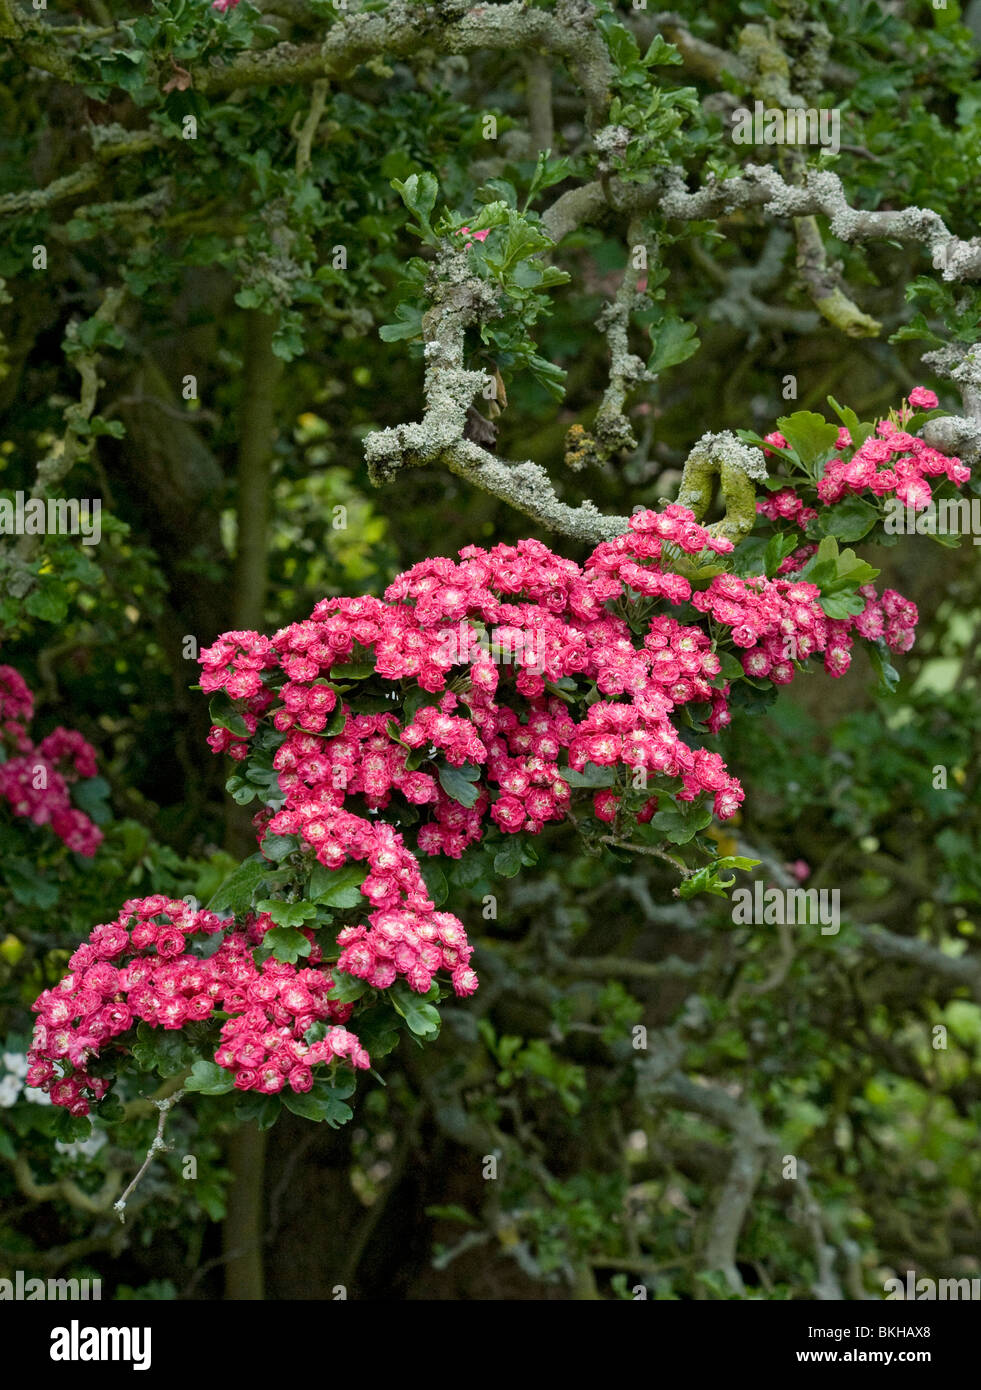 Crustose lichens growing on pink flowered ornamental hawthorn Stock Photo